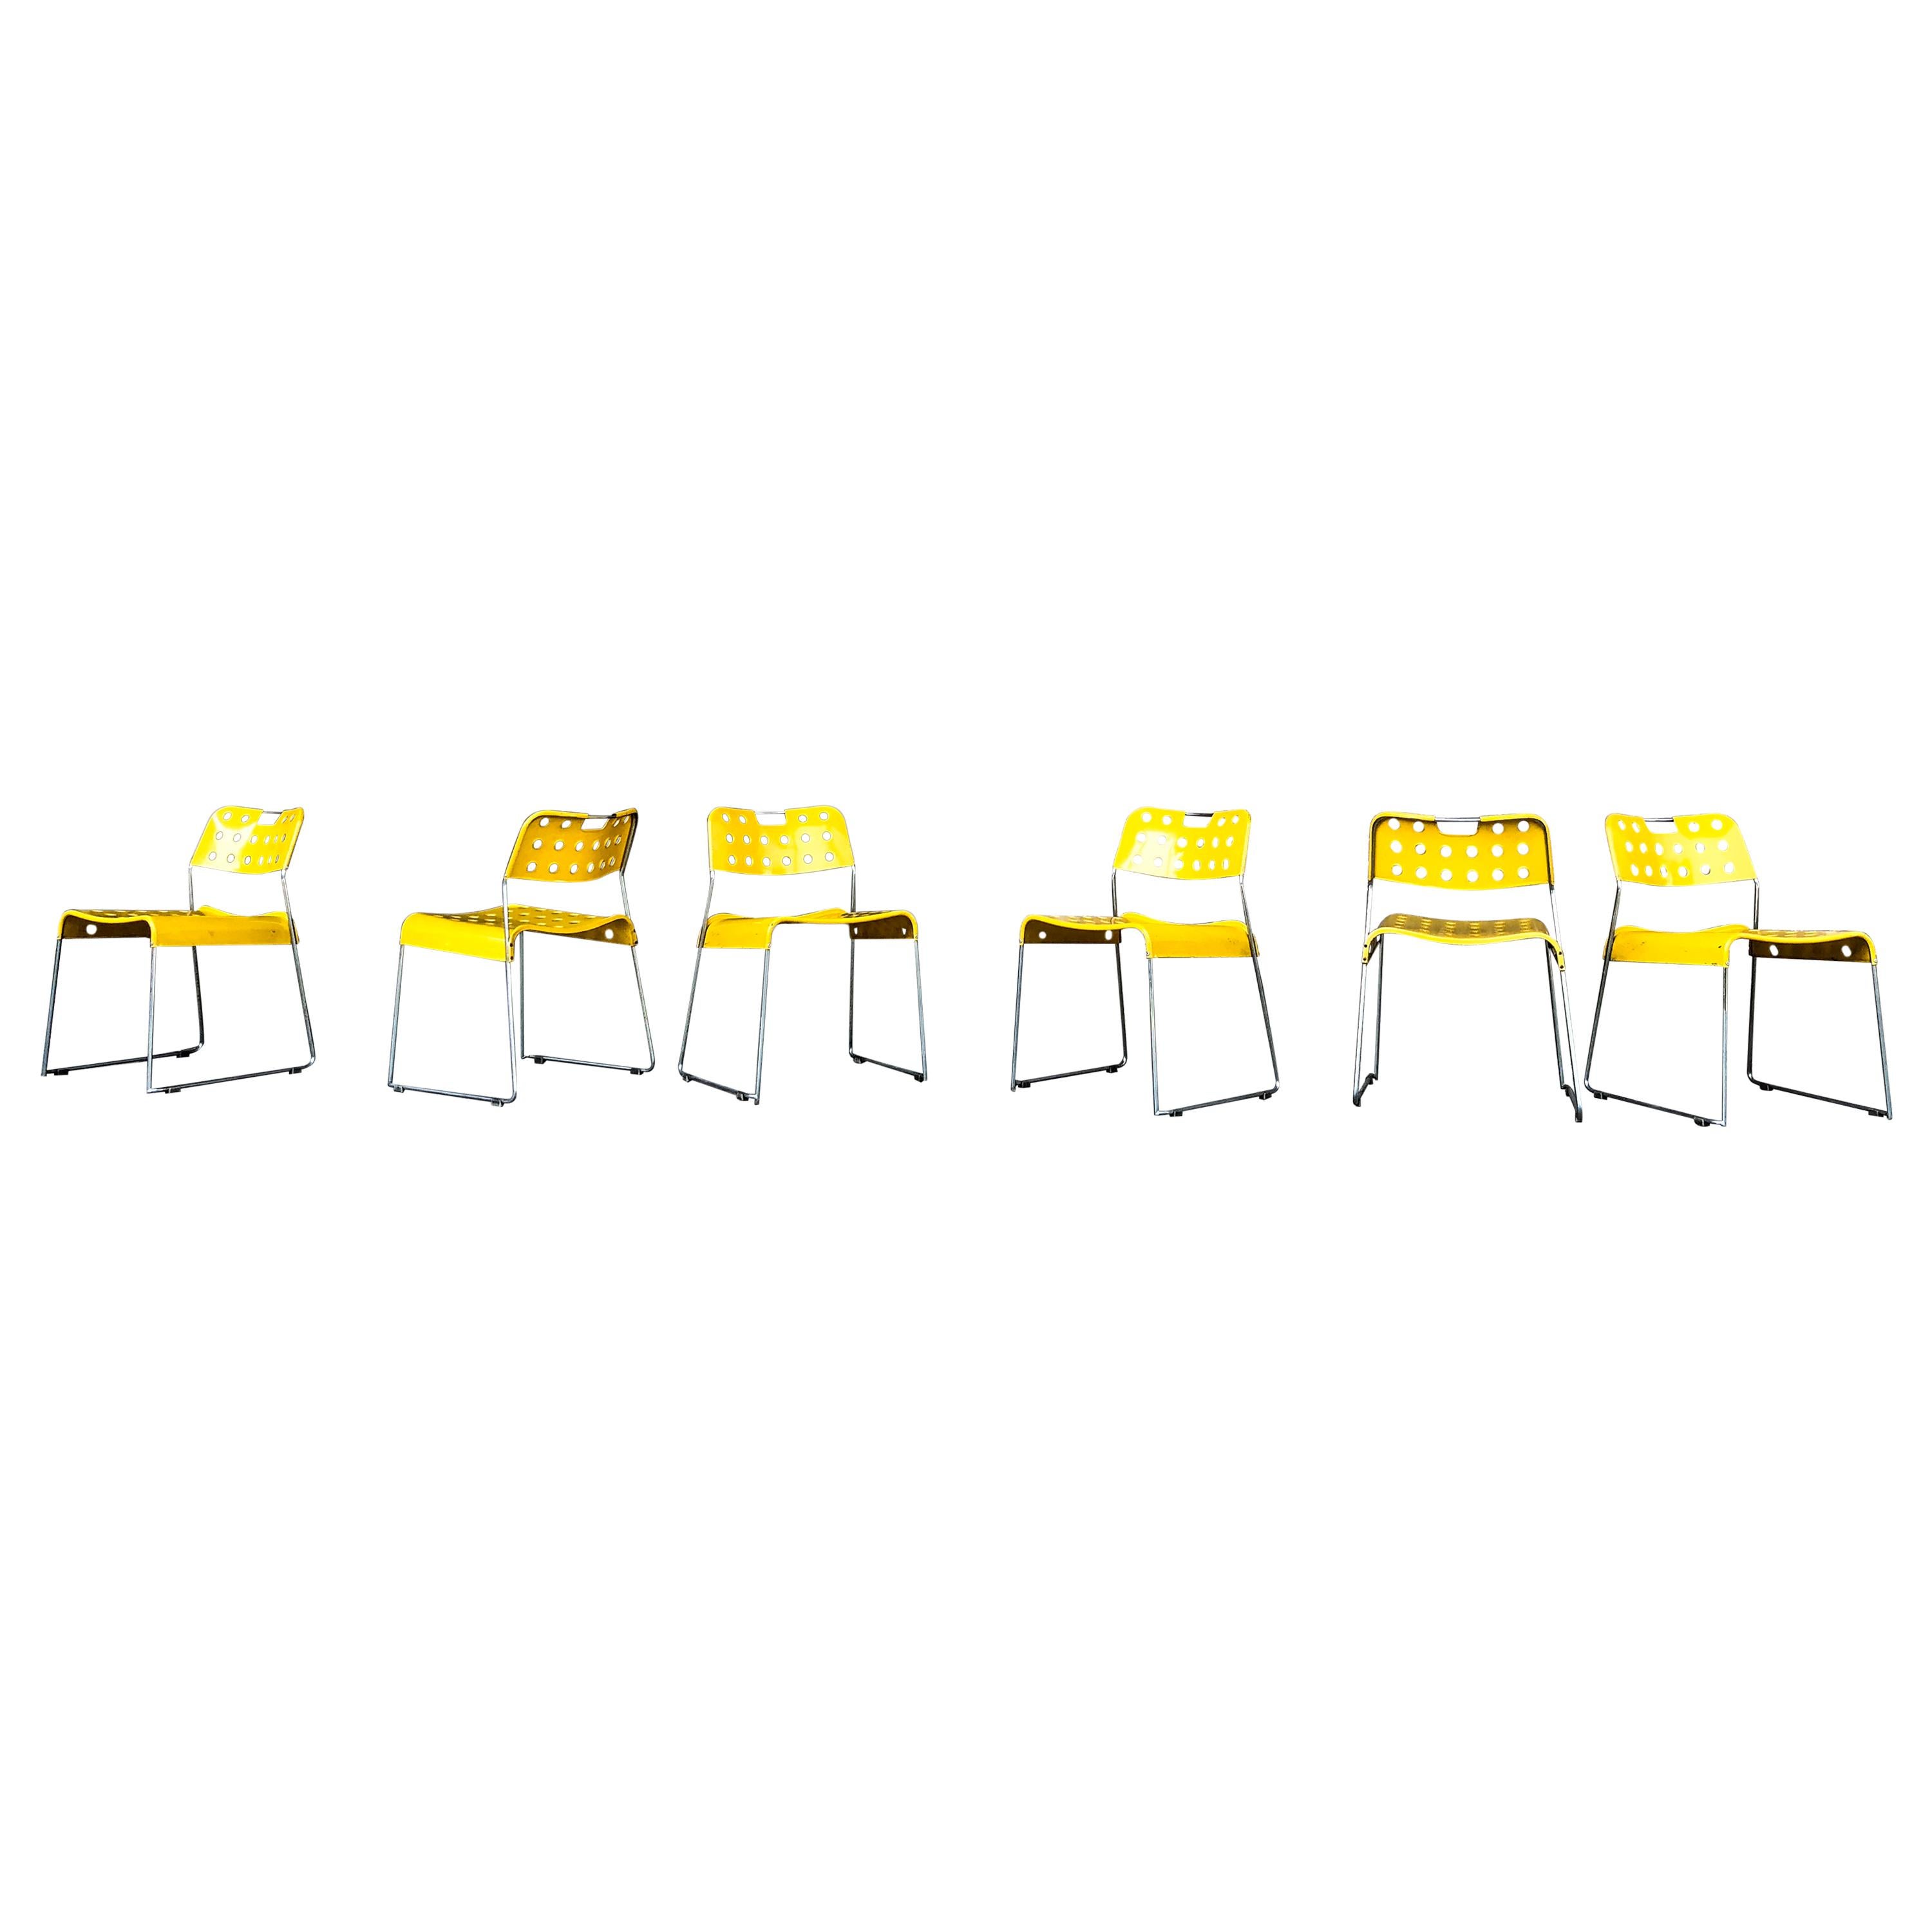 Rodney Kinsman Space Age Yellow Omstak Chair for Bieffeplast, 1971, Set of 18 For Sale 3